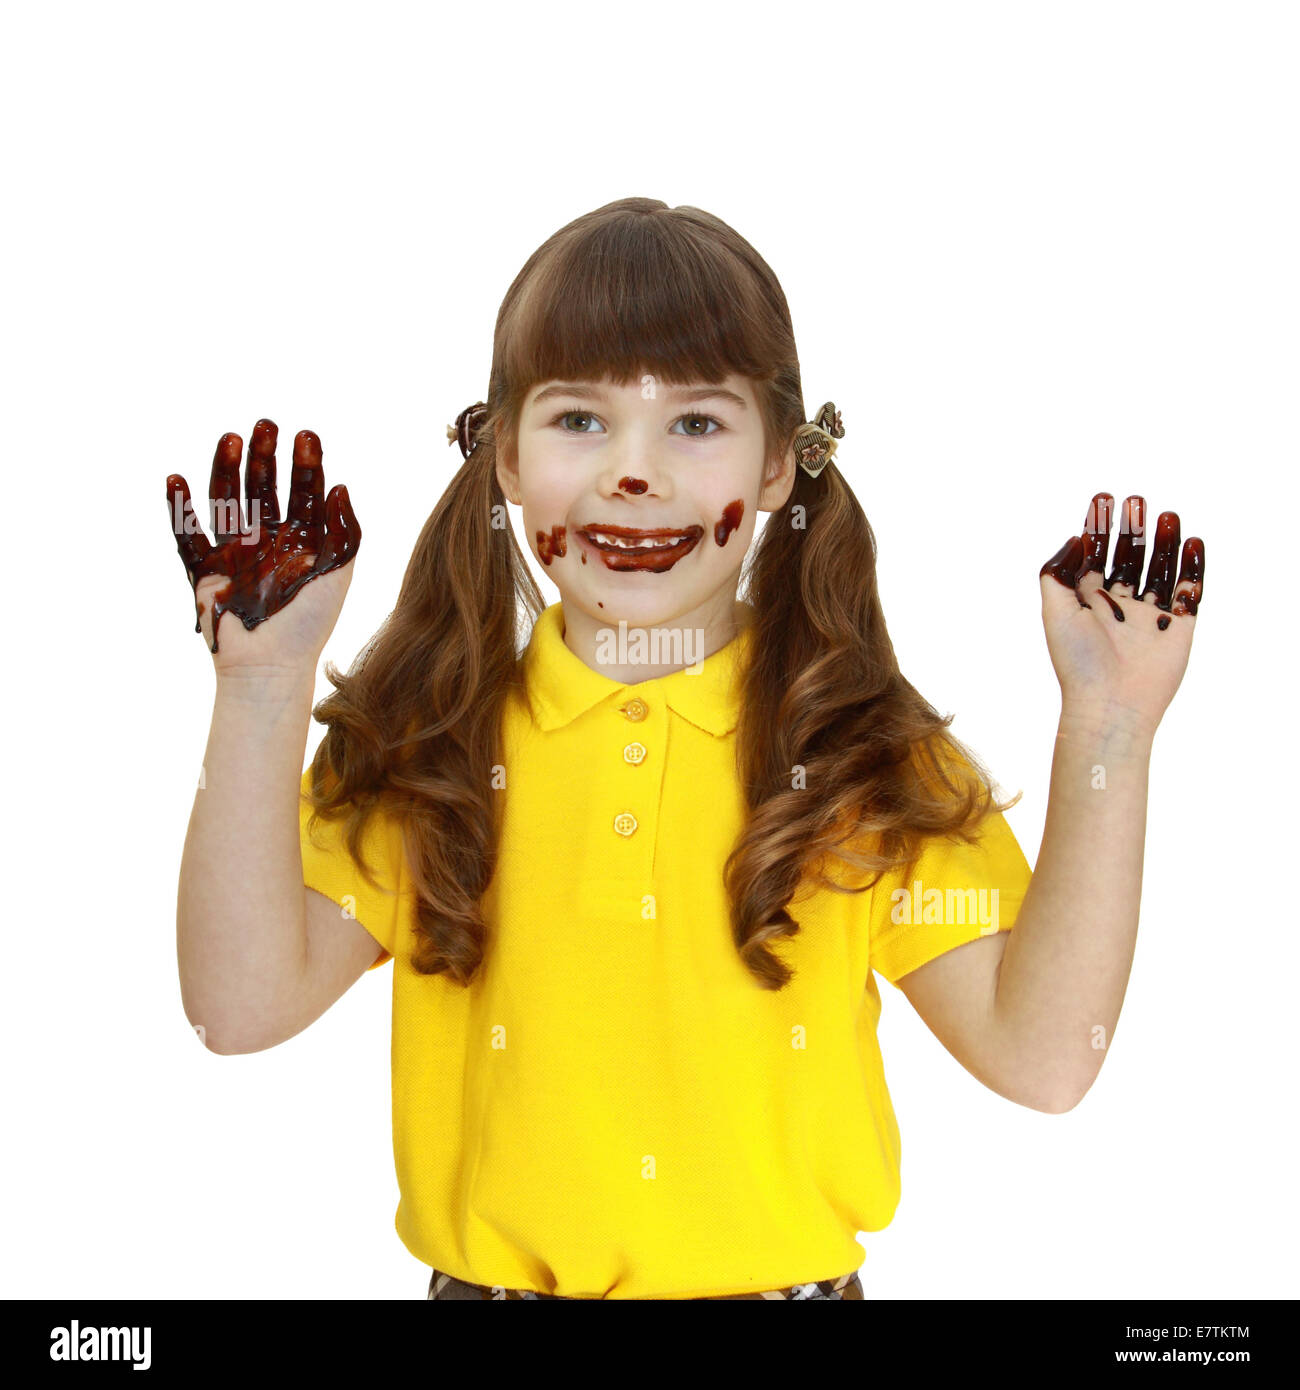 Girl with face and hands stained in chocolate isolated on white background Stock Photo